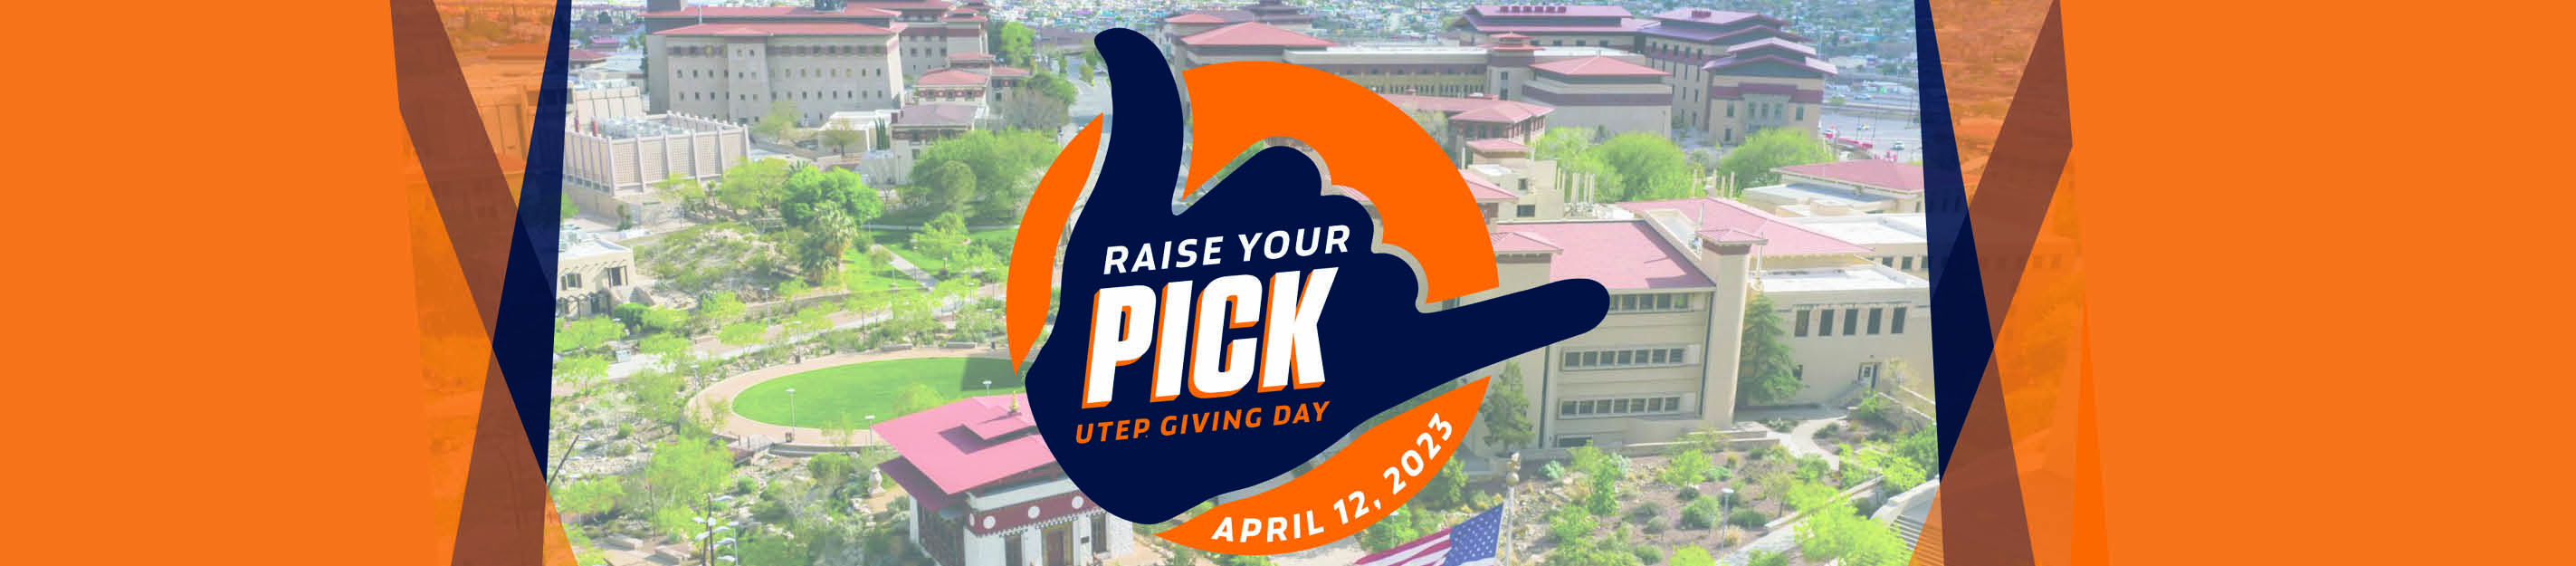 UTEP Giving Day: #raiseyourpick for engineering students on April 12! 